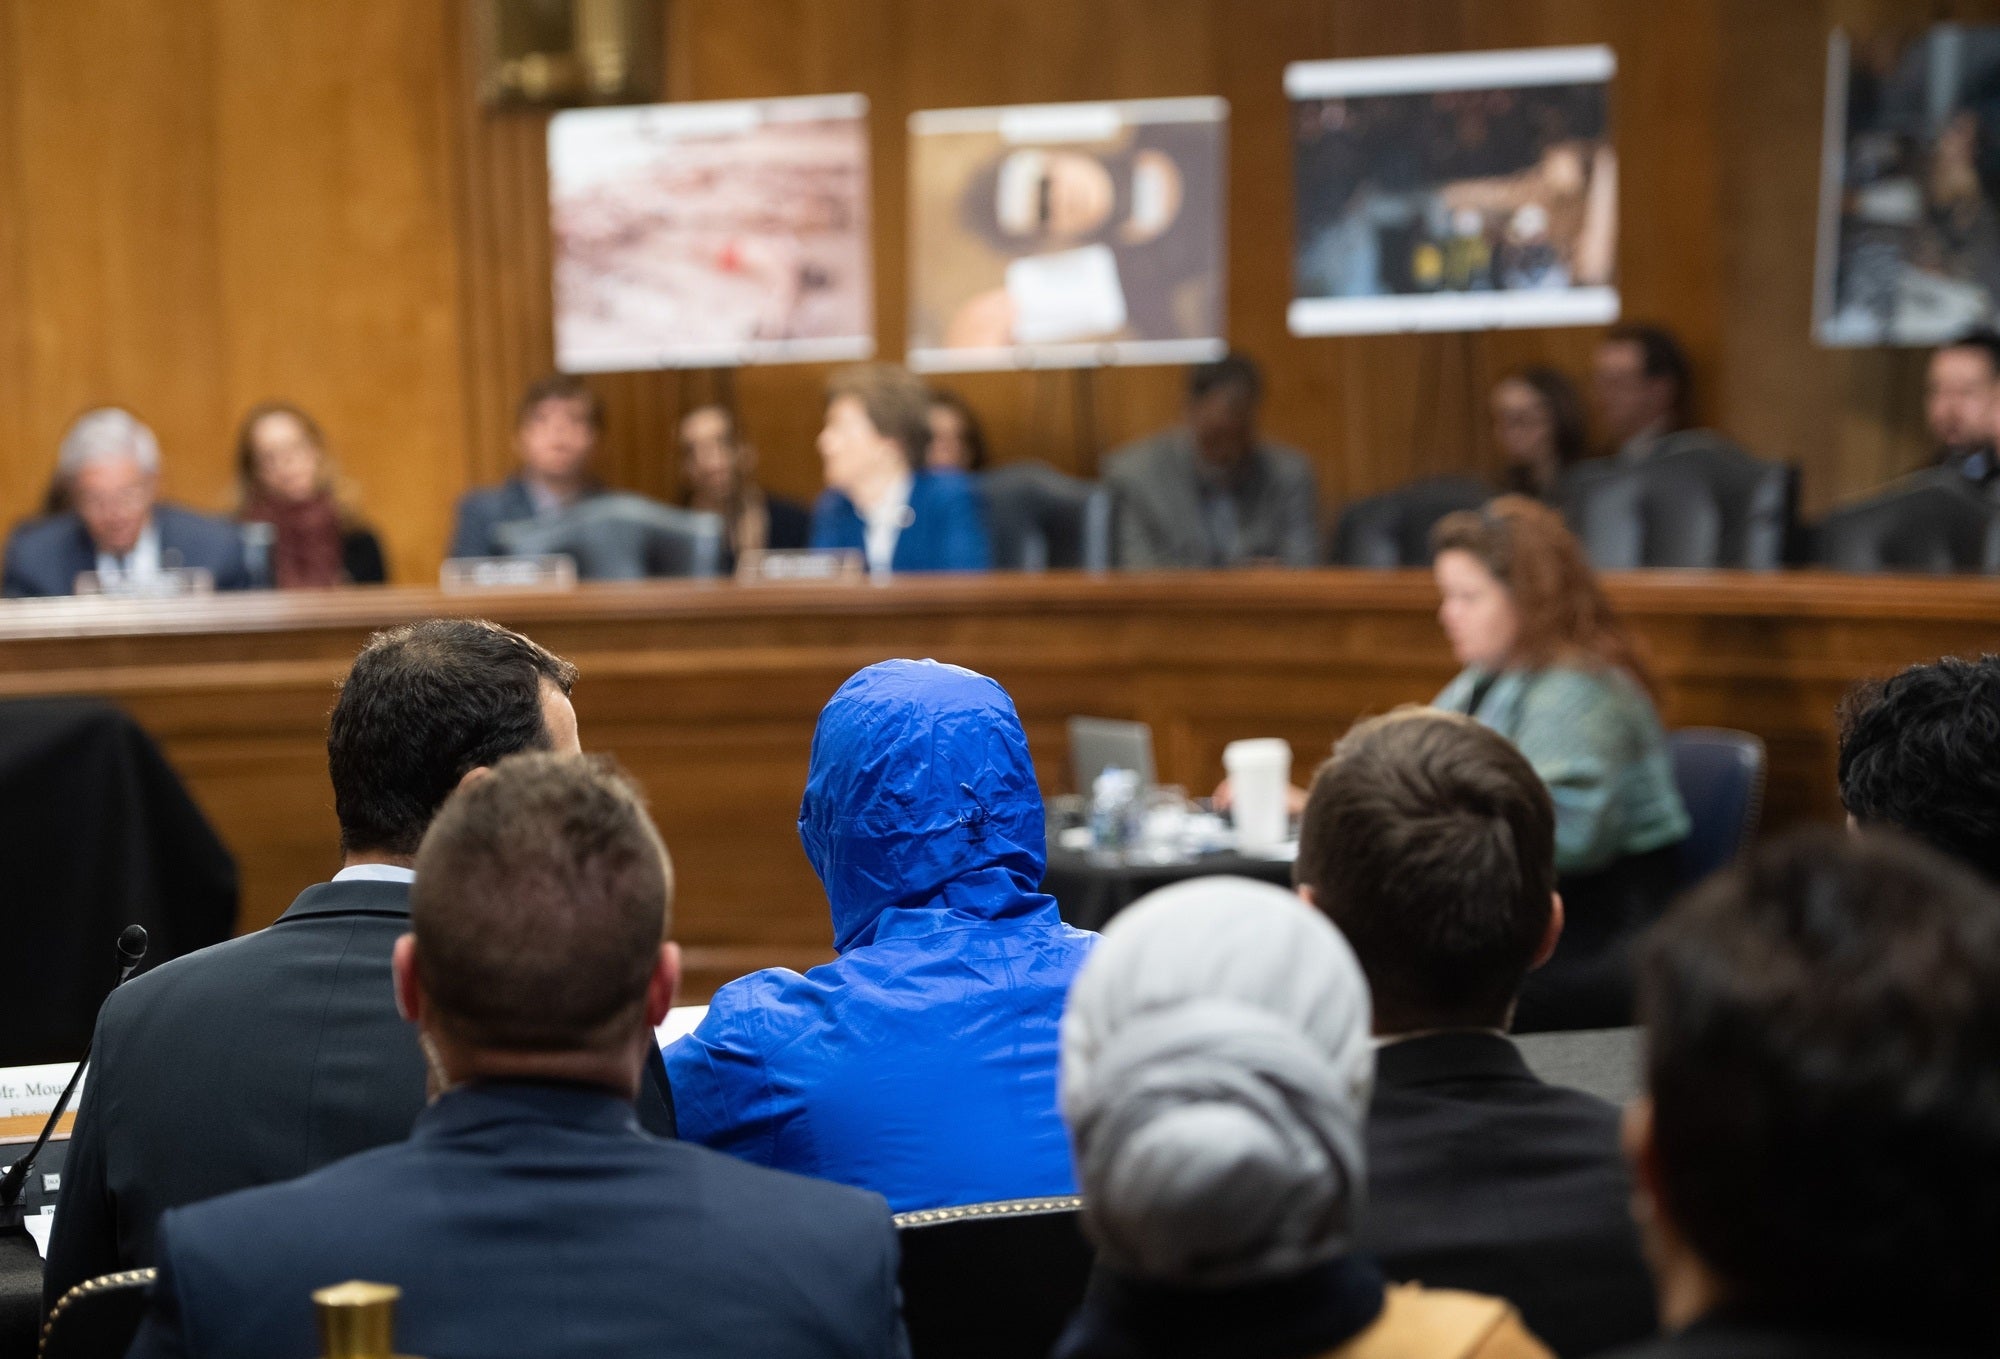 Syrian military defector ‘Caesar,’ testifies about atrocities in Syria during a Senate Foreign Relations committee hearing in Washington, DC, March 11, 2020.